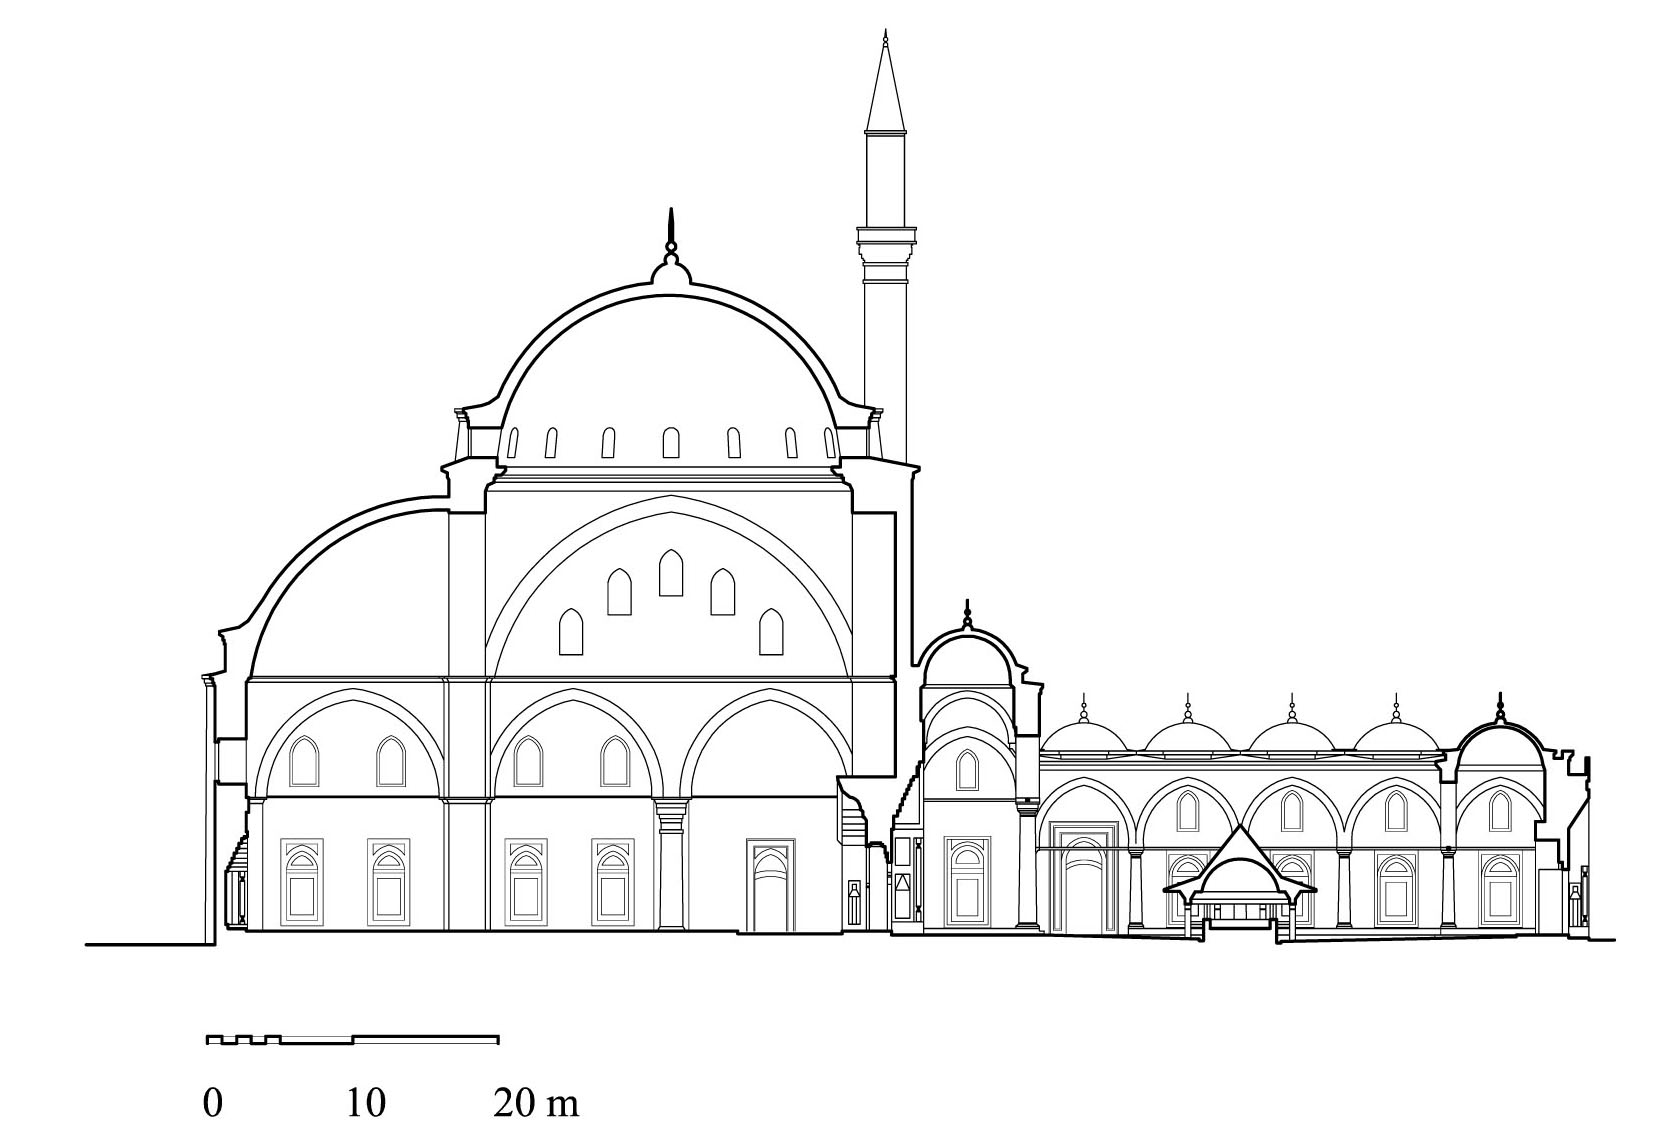 Reconstruction section of the original Fatih Mosque